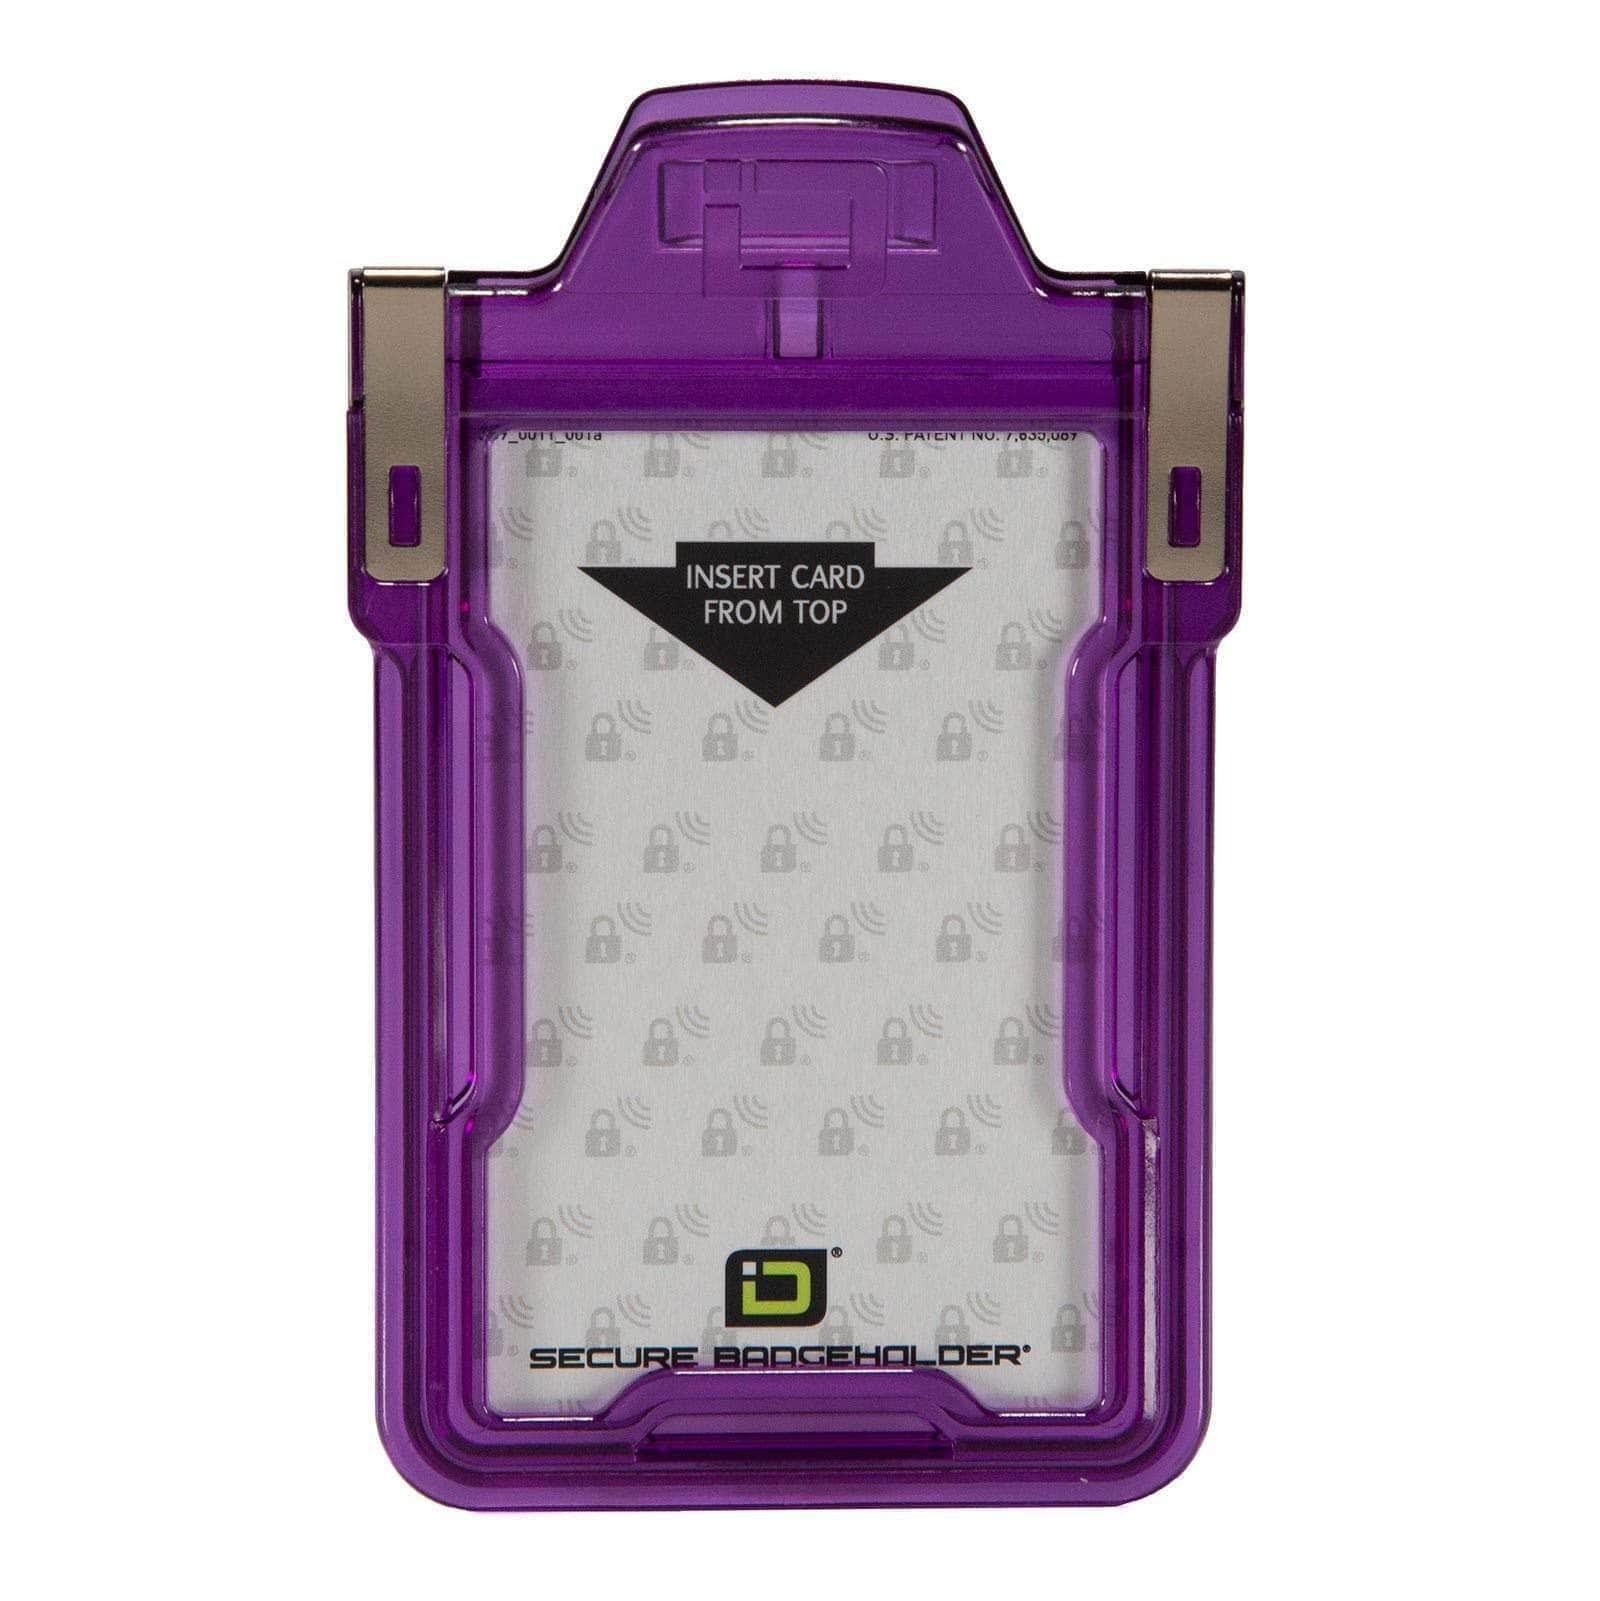 IDSH1004-purple-squeeze-to-read-secure-badge-holder-classic-front